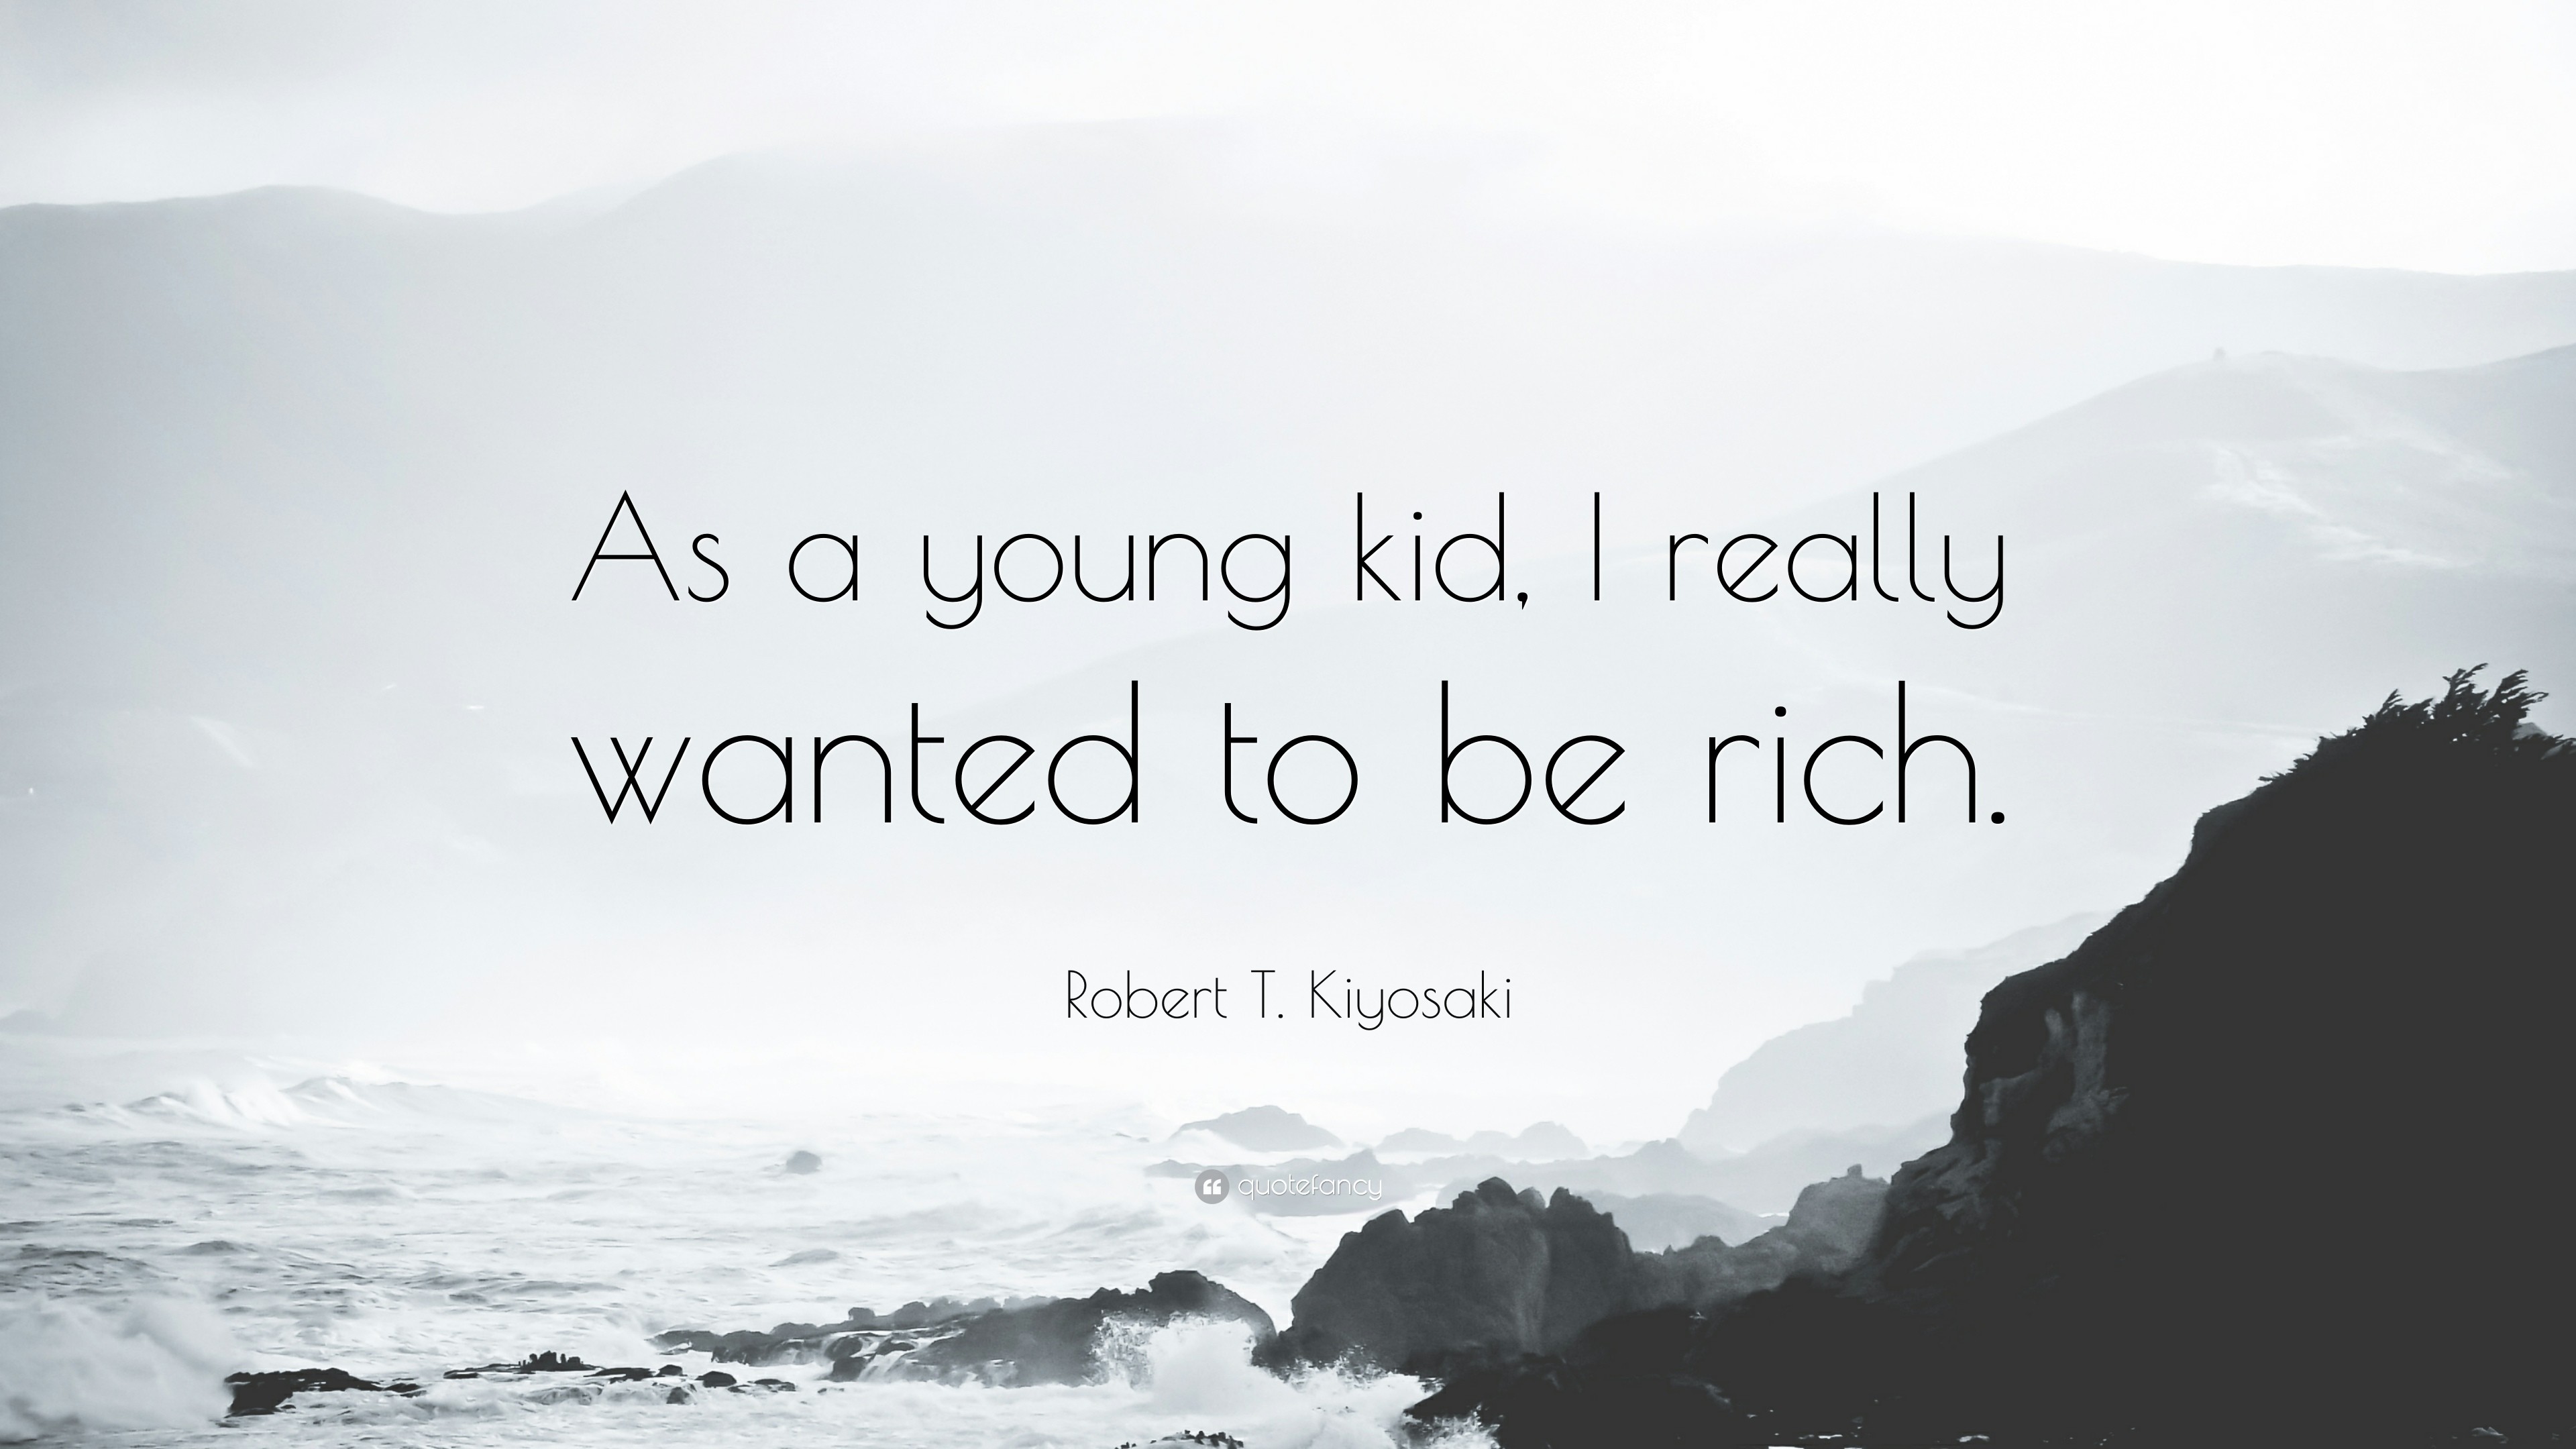 3840x2160 Robert T. Kiyosaki Quote: “As a young kid, I really wanted to